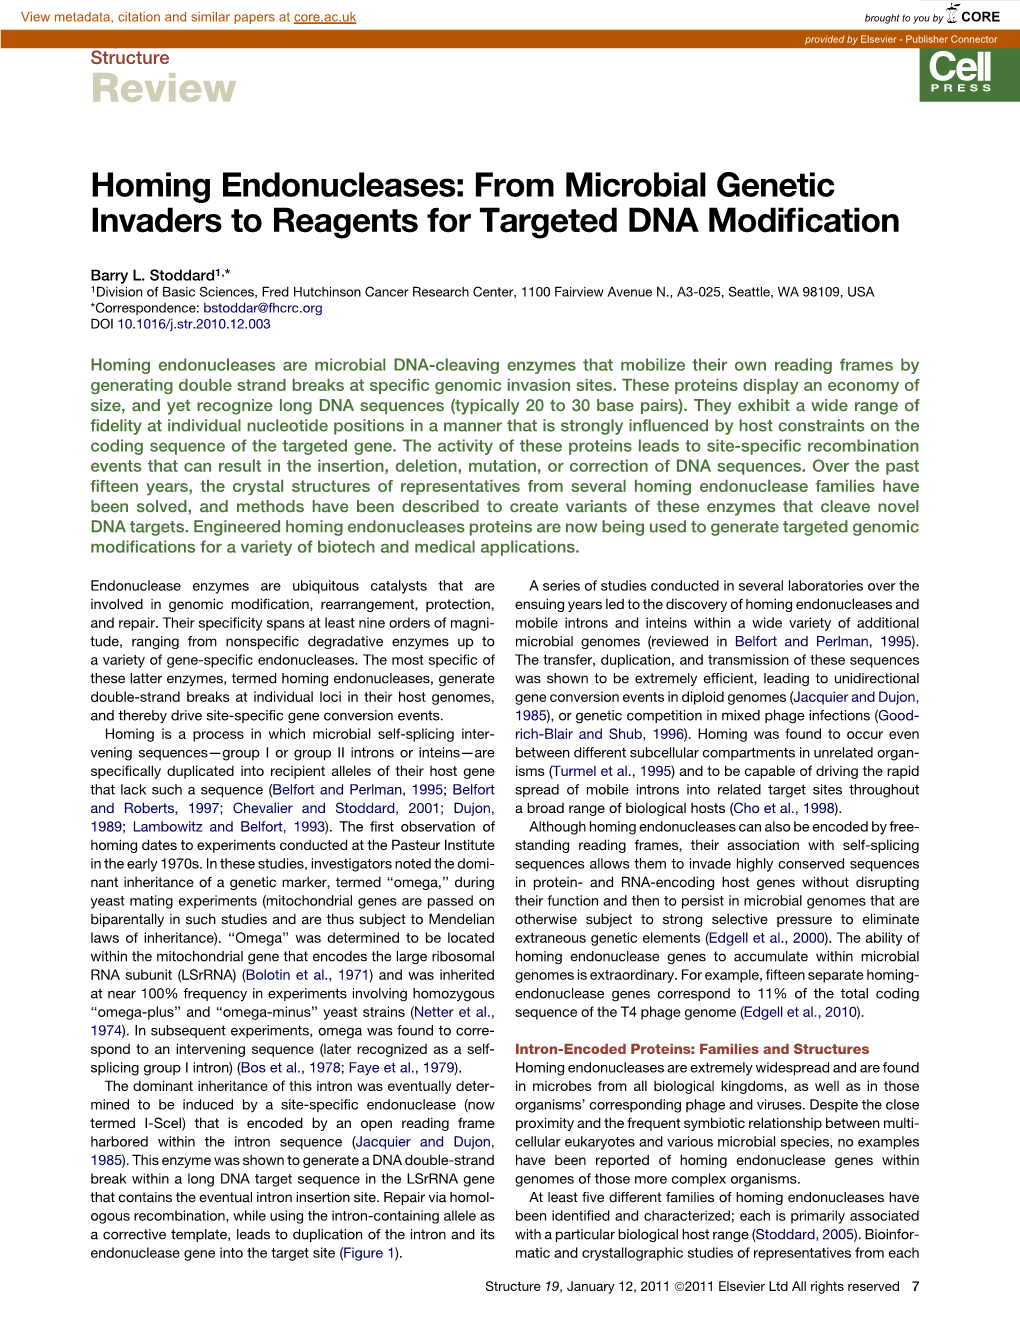 Homing Endonucleases: from Microbial Genetic Invaders to Reagents for Targeted DNA Modiﬁcation